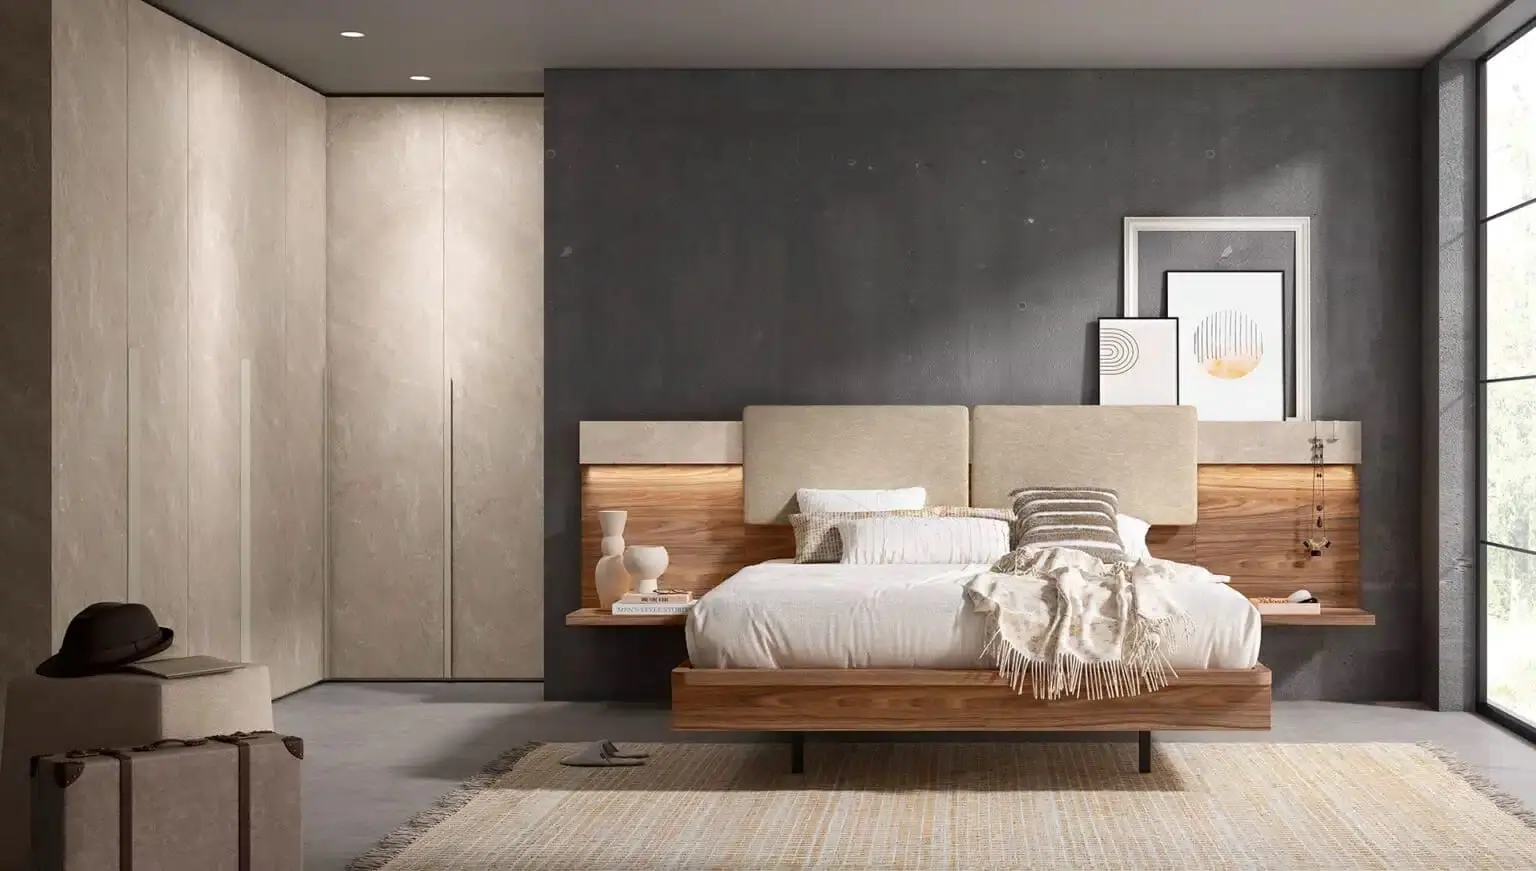 Revolutionising bedroom design: introducing ROS’s new ReLoveution Collection